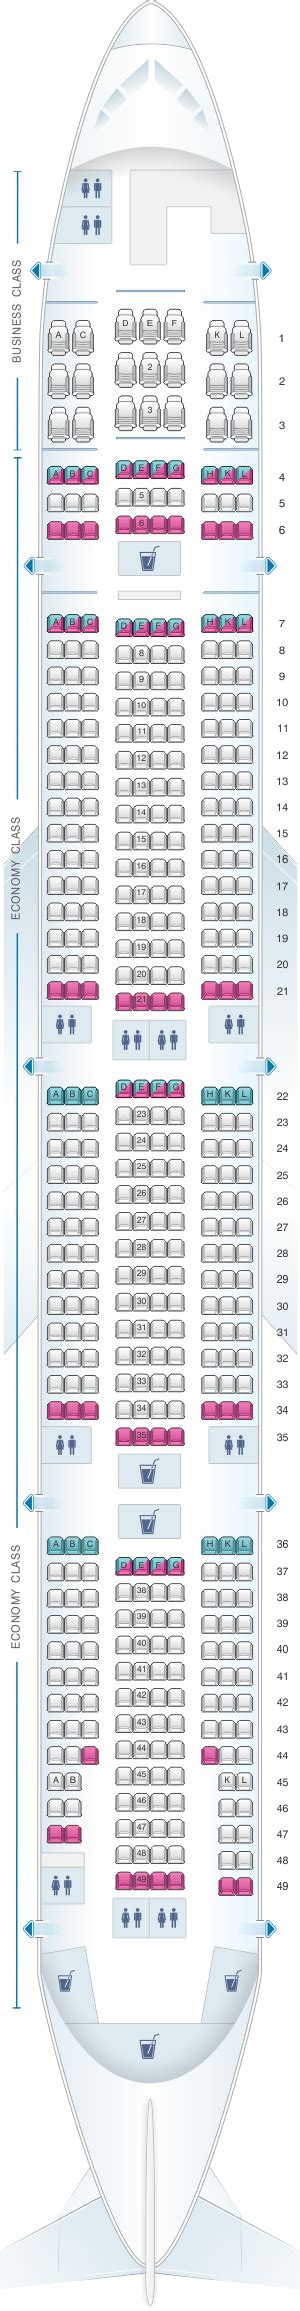 Seat Map Air China Boeing B777 300er 311pax Seatmaestro Porn Sex Picture